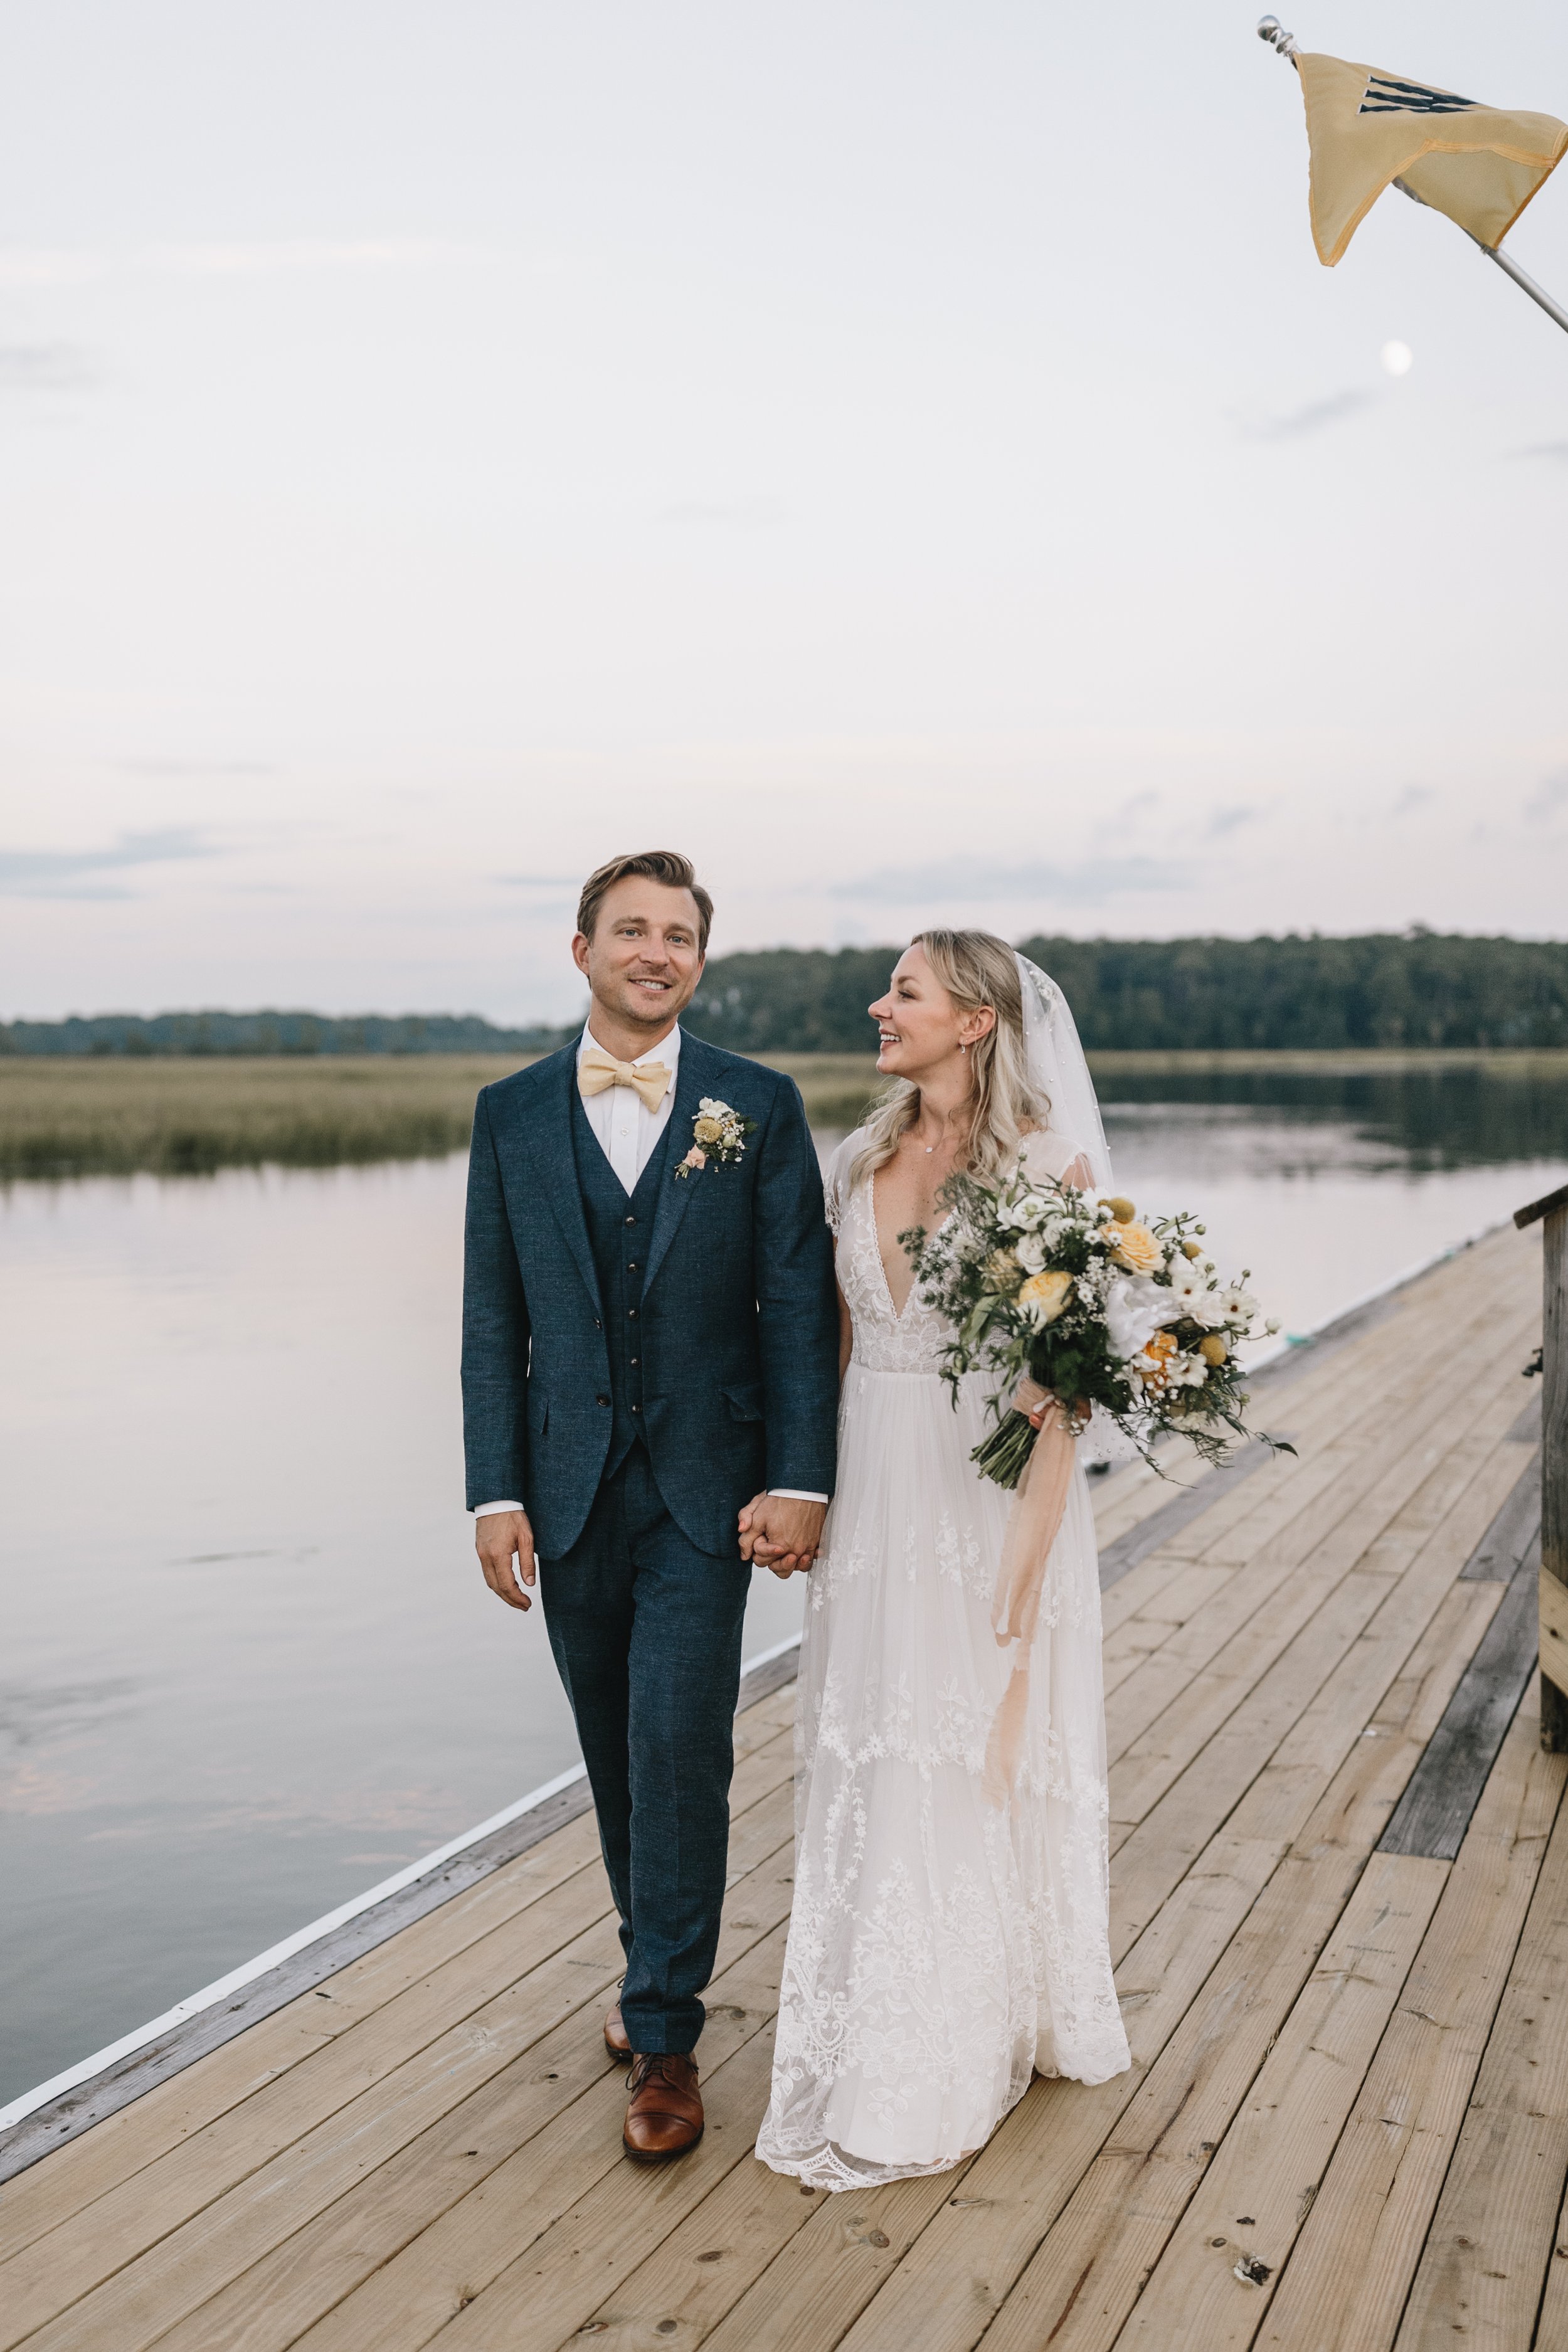 ivory-and-beau-wedding-and-florals-southern-wedding-savannah-florist-savannah-wedding-savannah-wedding-planner-the-wyld-dock-bar-historic-savannah-georgia-wedding-flowers-wedding-blog-wedding-inspiration-LAUREN+NICK_WEDDING-630.jpg